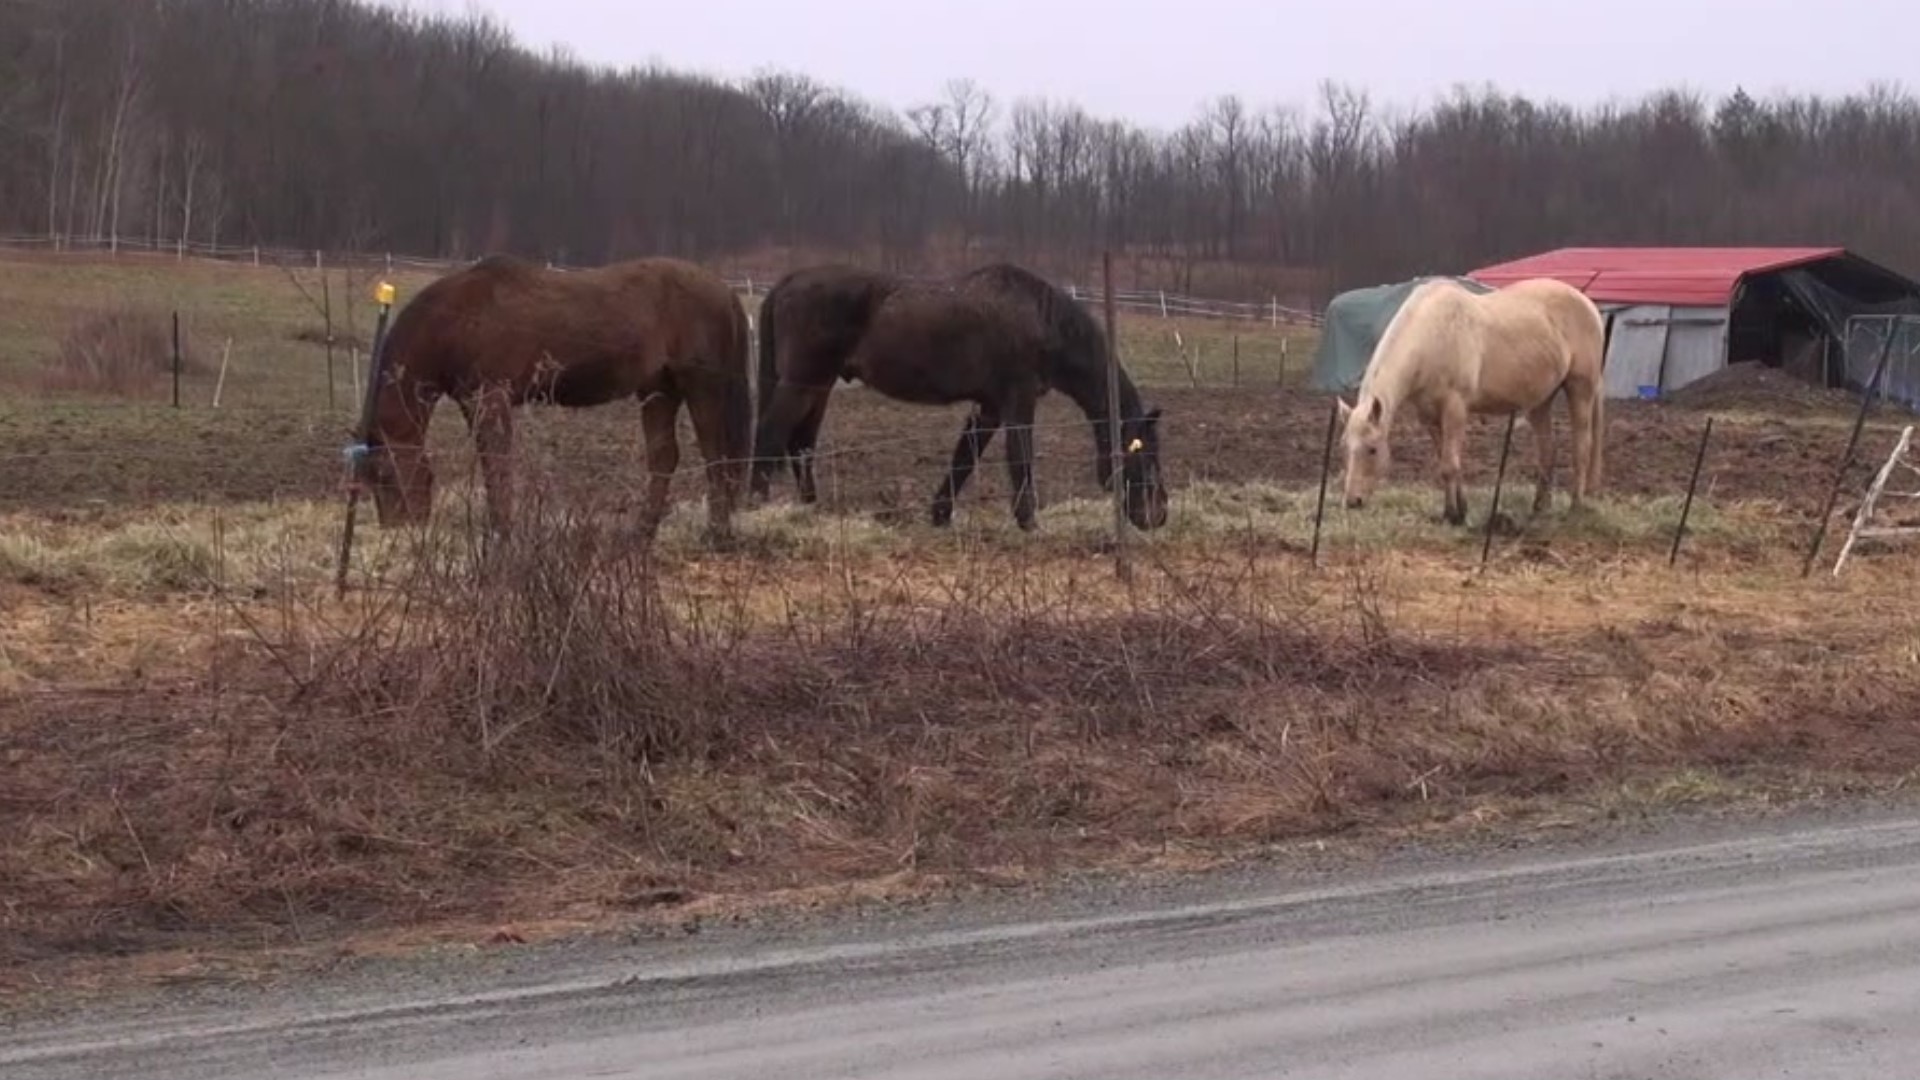 The pandemic has been difficult for Elk Mountain Equine Rescue as it tries to get non-profit status, donations are slow as well to care for its animals